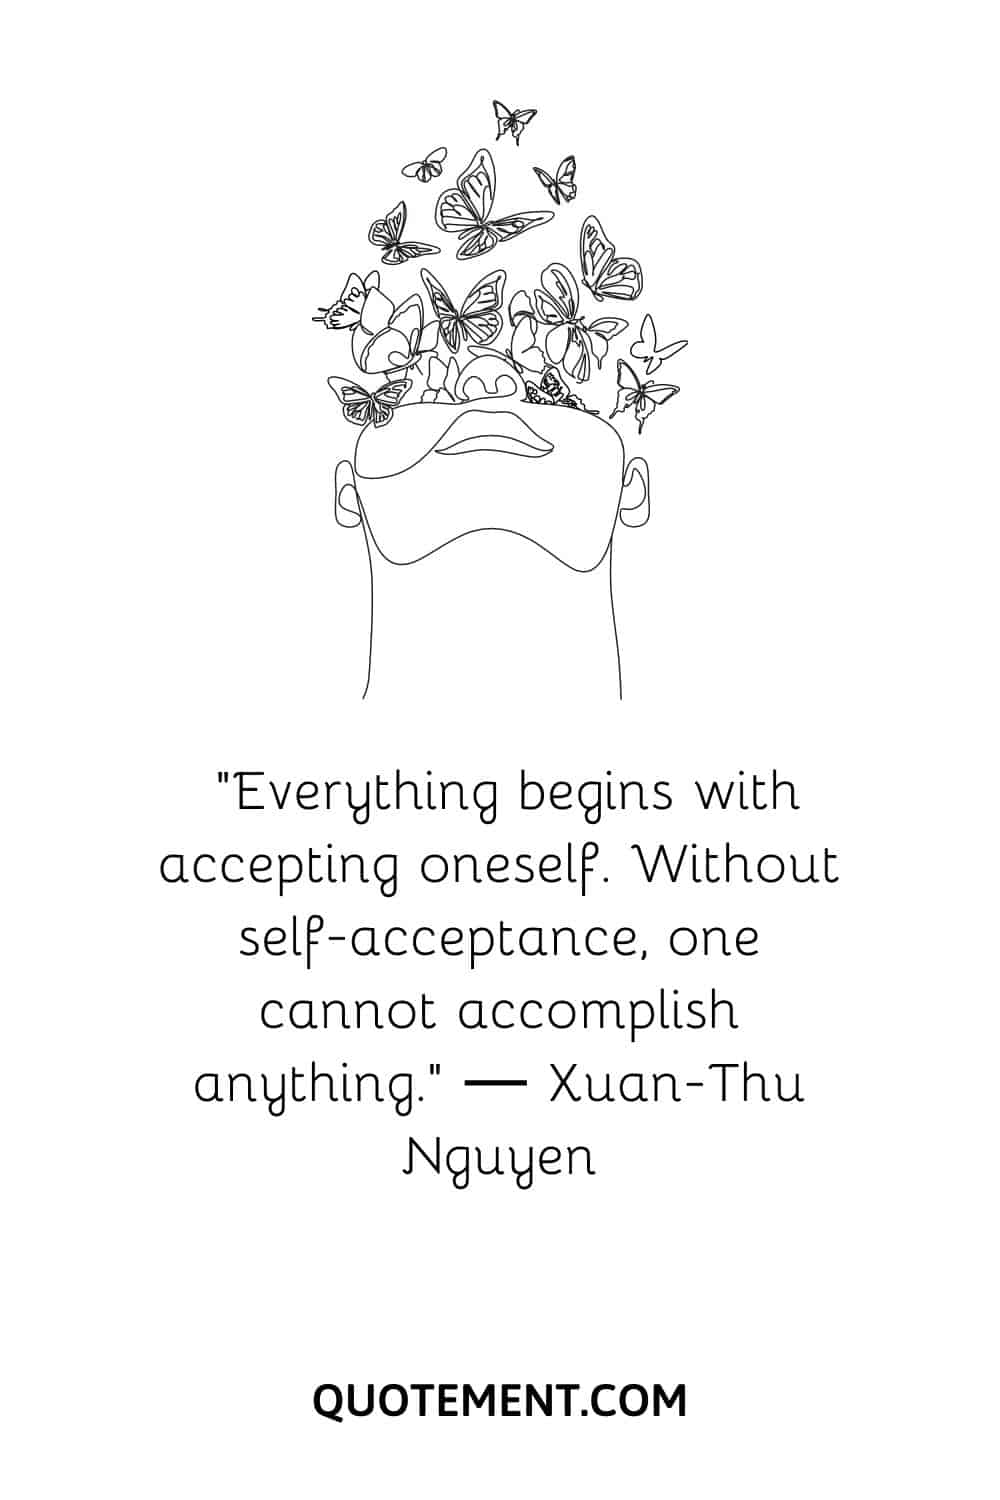 “Everything begins with accepting oneself. Without self-acceptance, one cannot accomplish anything.” ― Xuan-Thu Nguyen